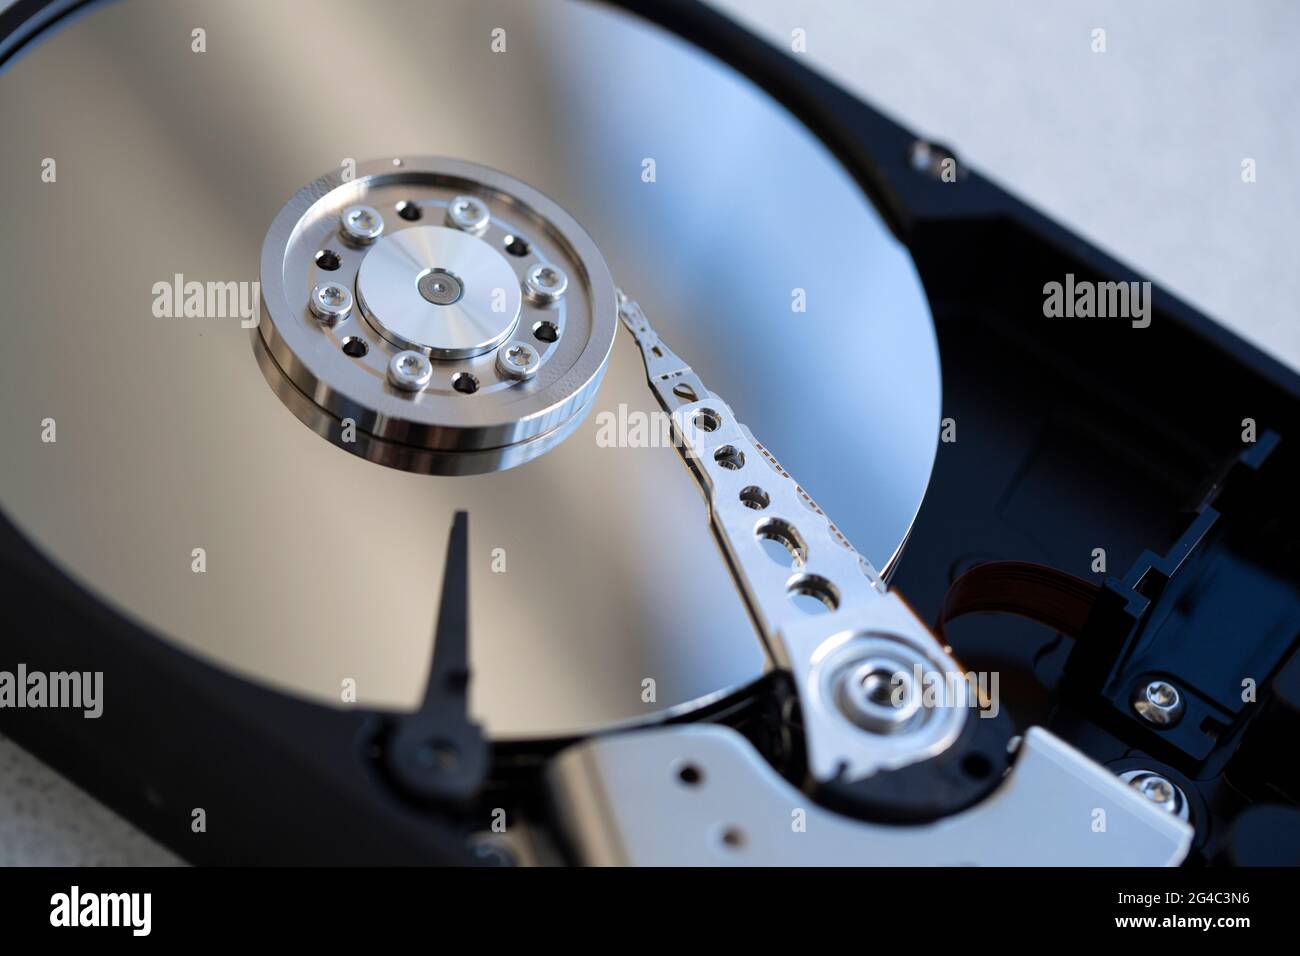 Hard disk of a computer opened for repair Stock Photo